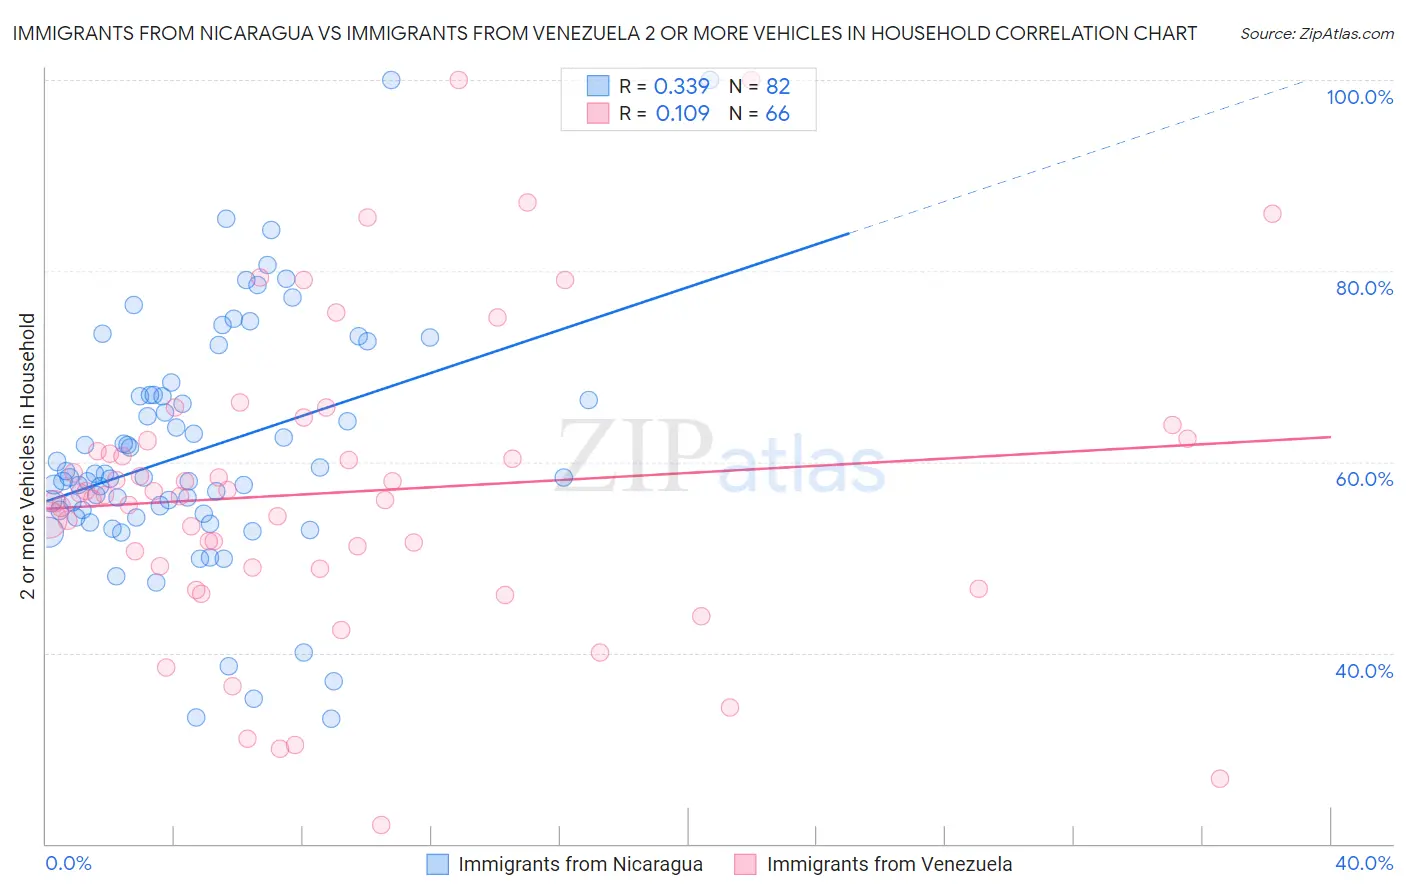 Immigrants from Nicaragua vs Immigrants from Venezuela 2 or more Vehicles in Household